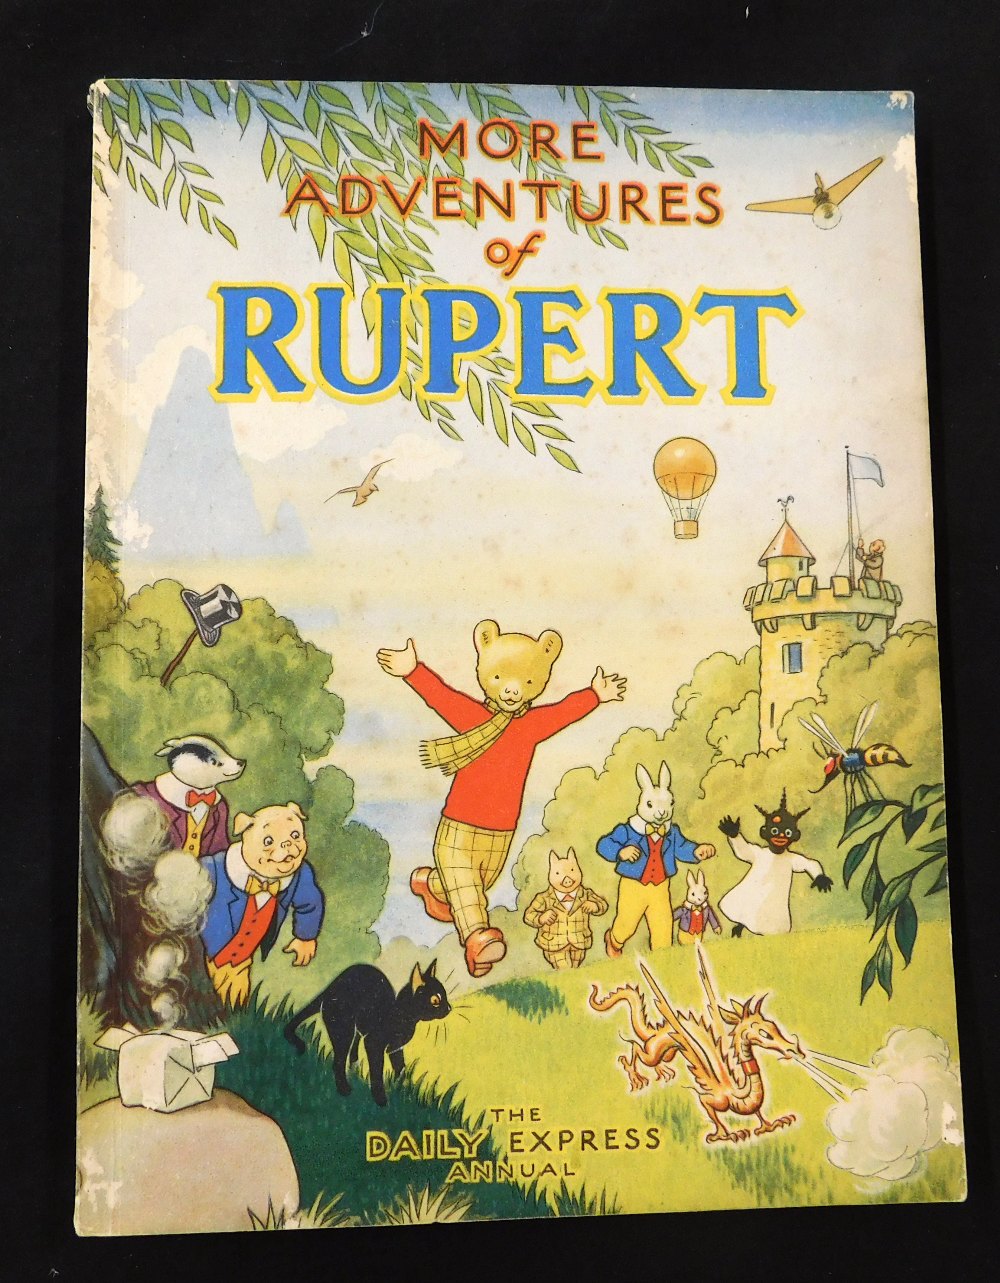 MORE ADVENTURES OF RUPERT, [1947], annual, price unclipped, inscription on "This book belongs to"